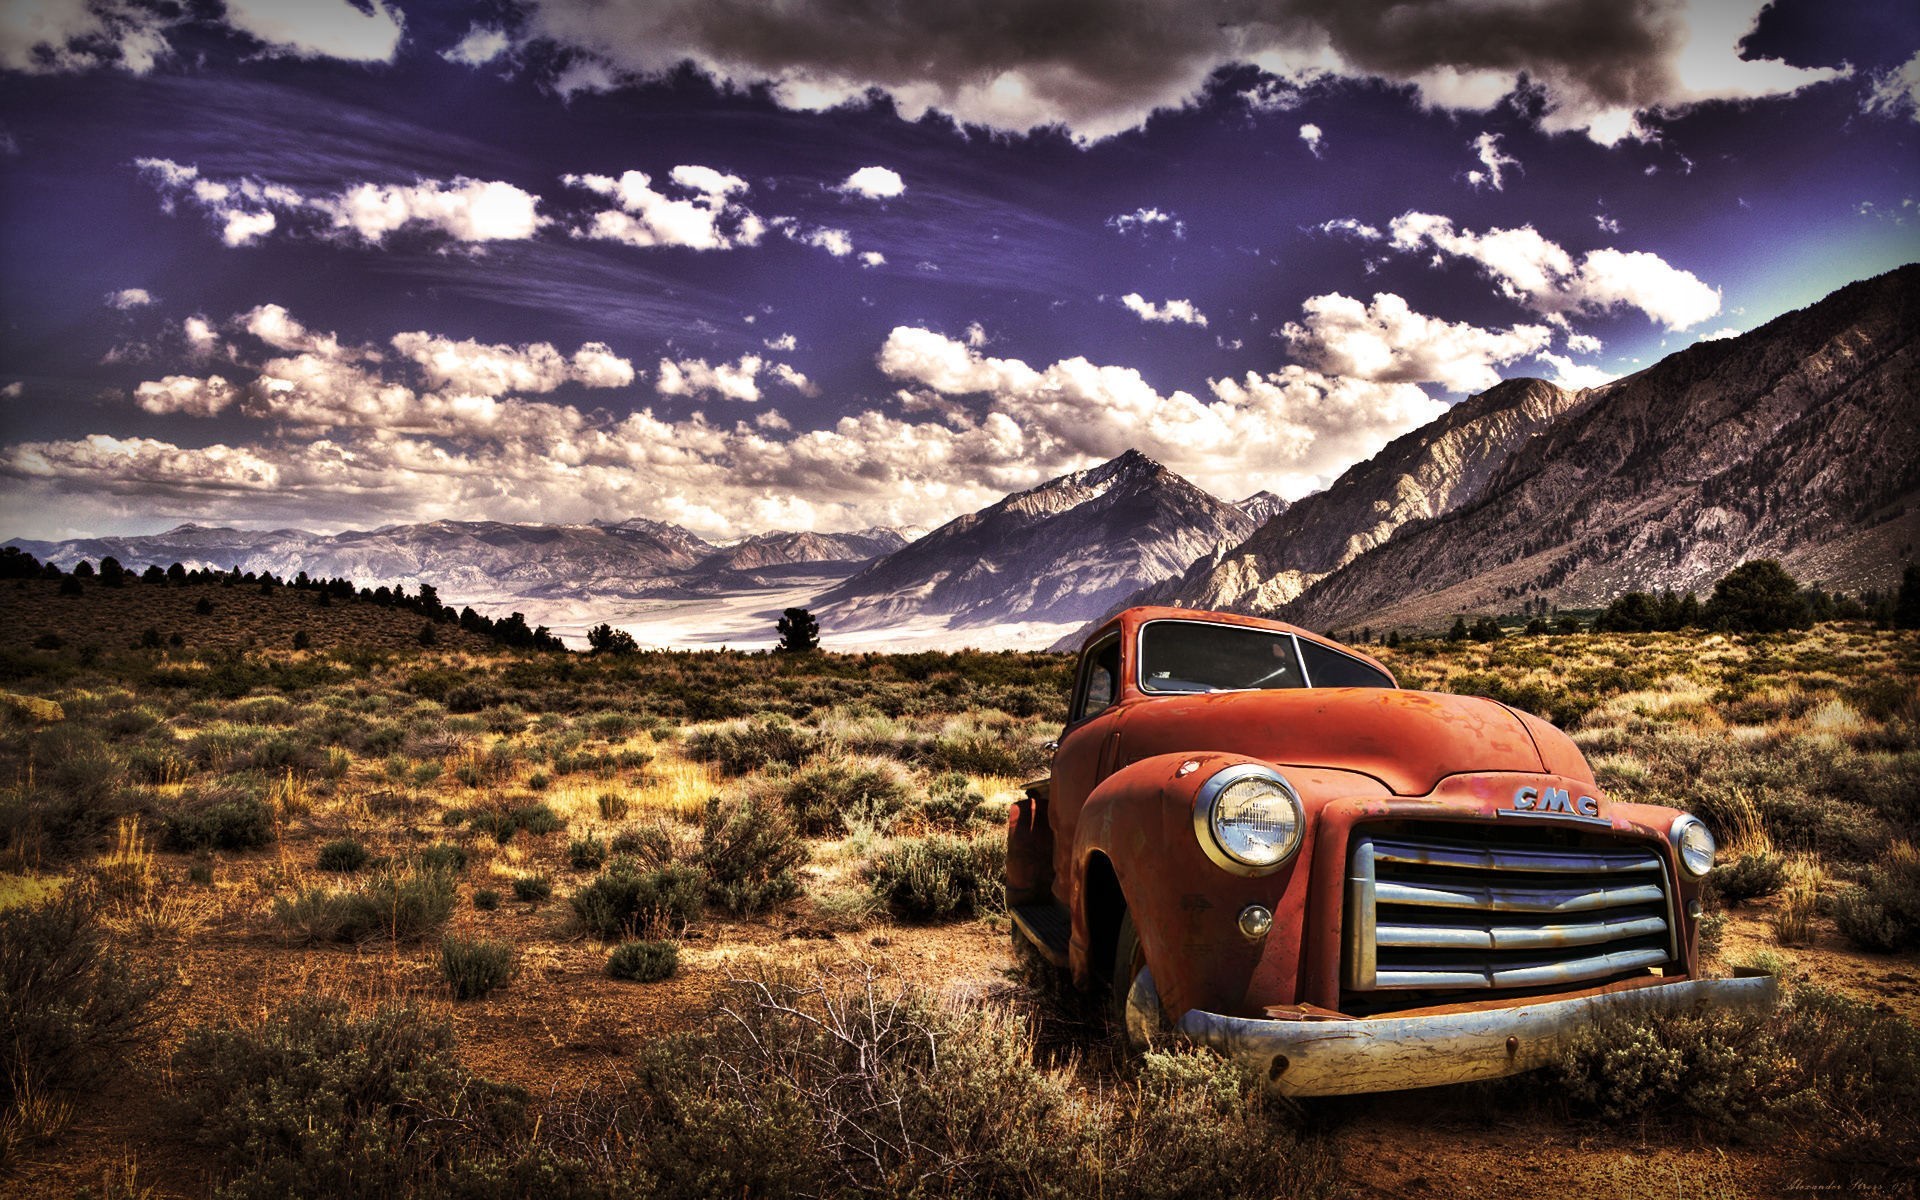 landscape, Nature, HDR, Mountains, Sky, Car, Vehicle, Clouds, Old car